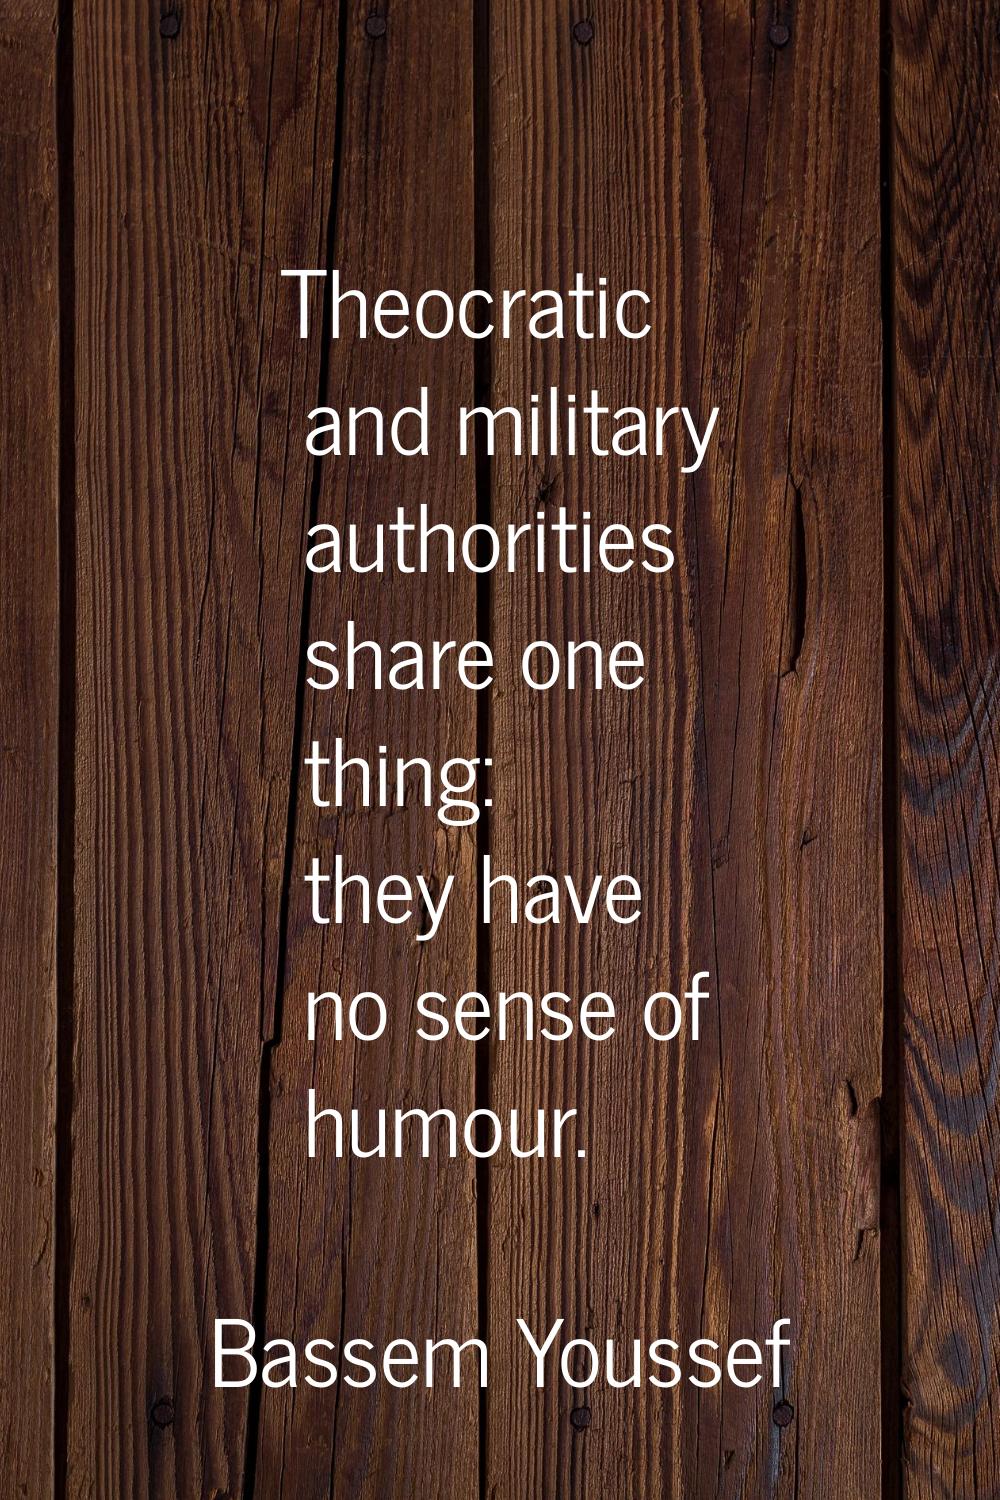 Theocratic and military authorities share one thing: they have no sense of humour.